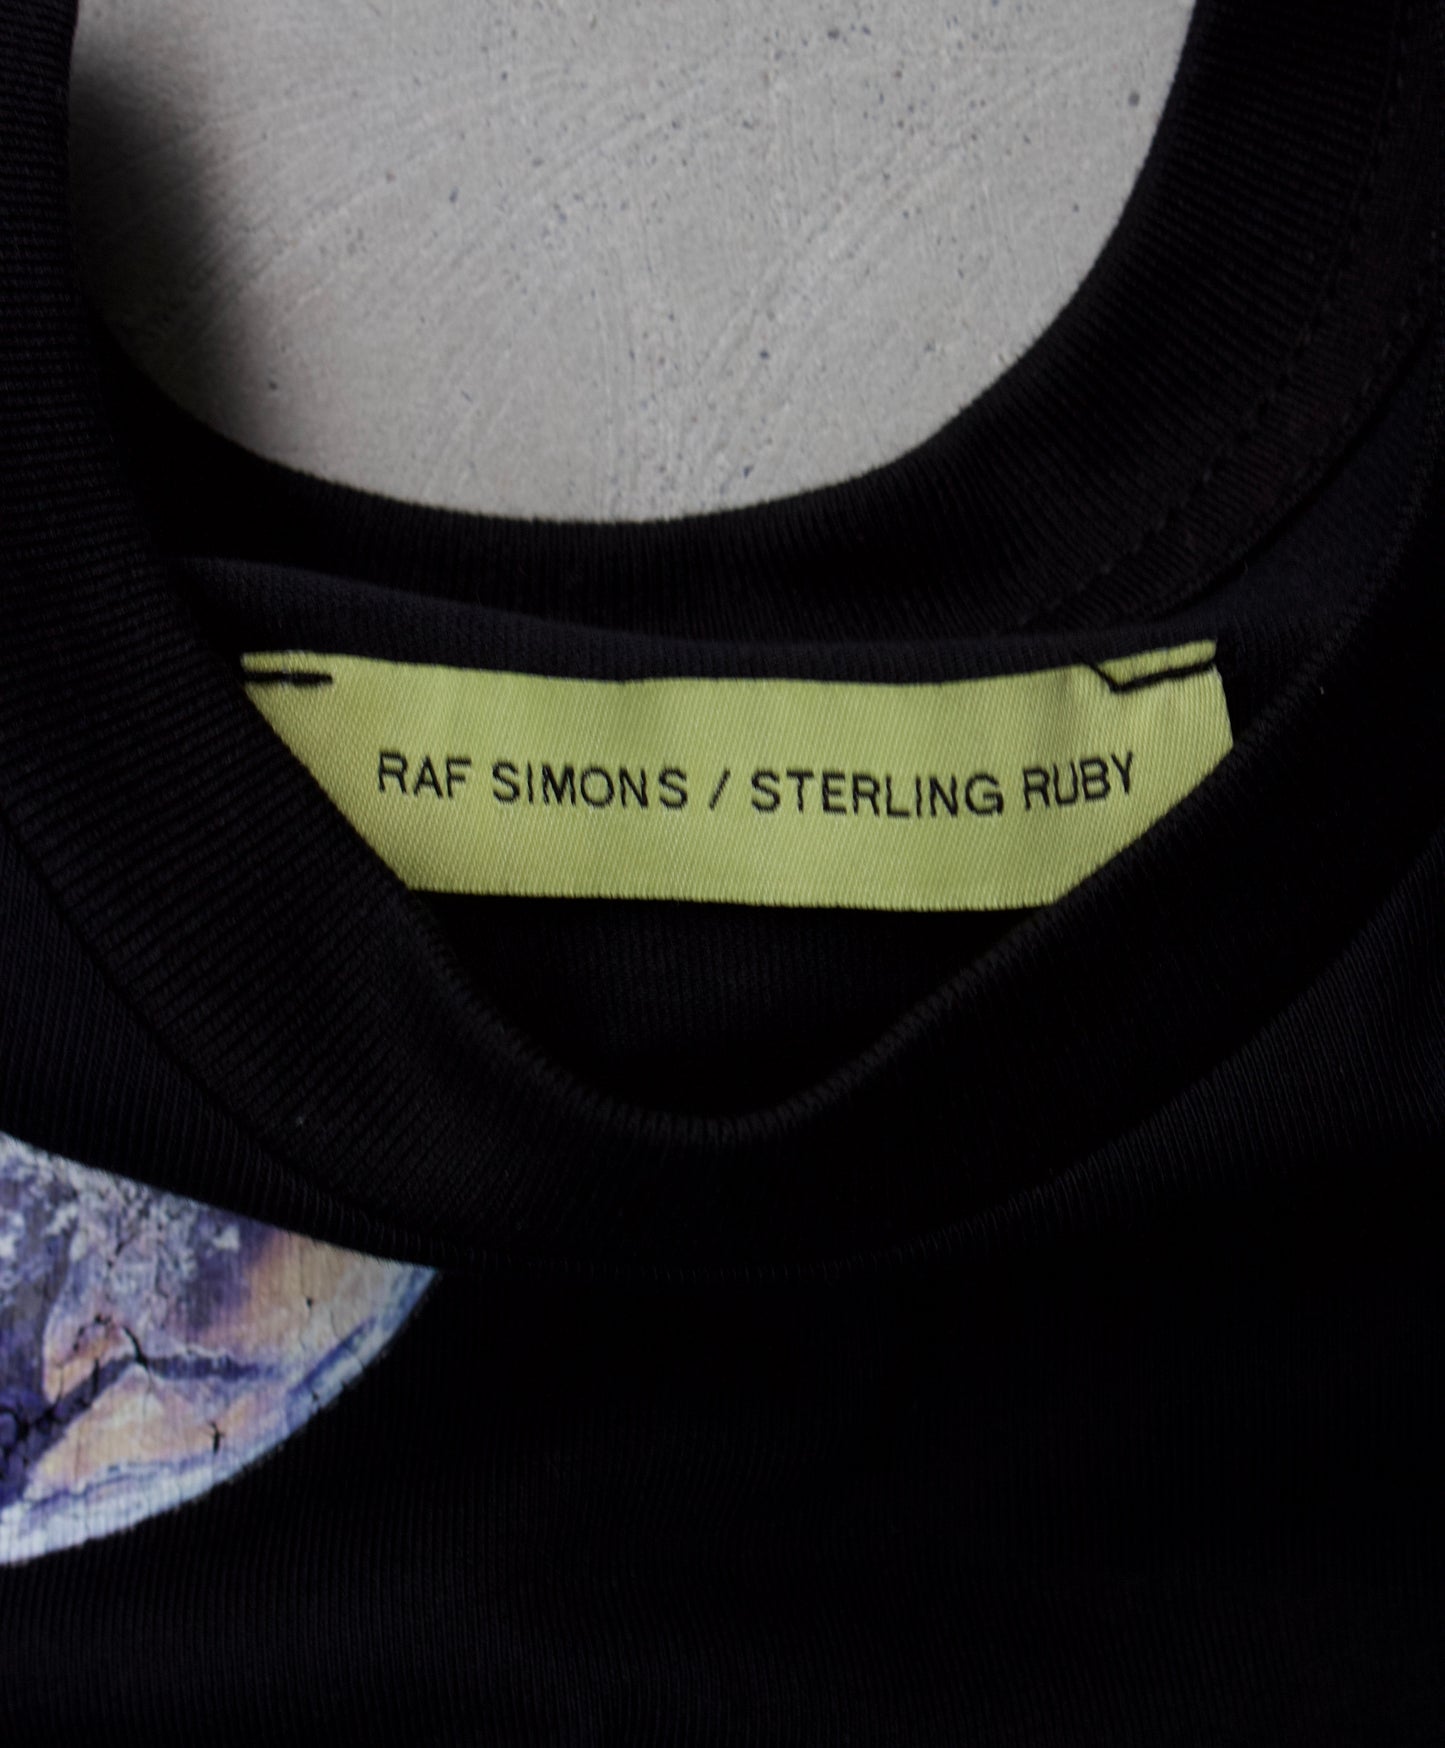 Raf Simons x Sterling Ruby AW14 “FATHERS” Graphic T-shirt